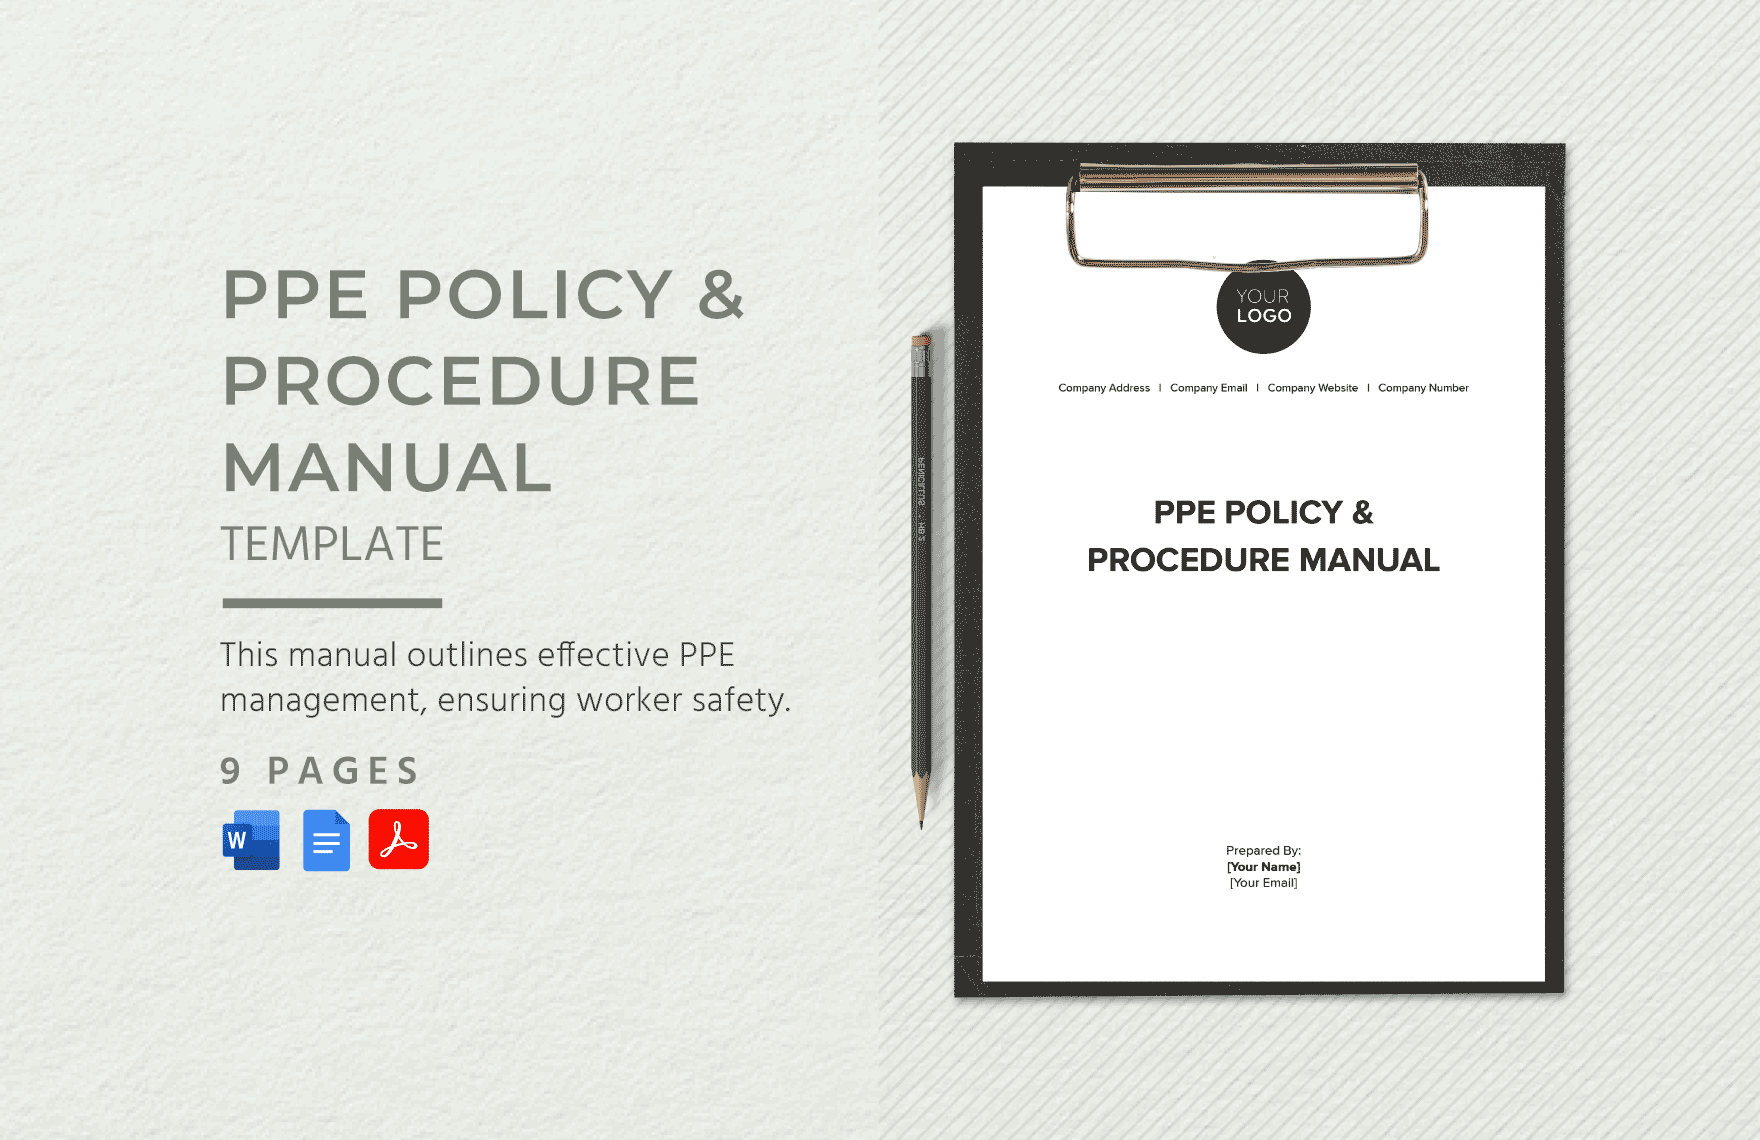 PPE Policy & Procedure Manual Template